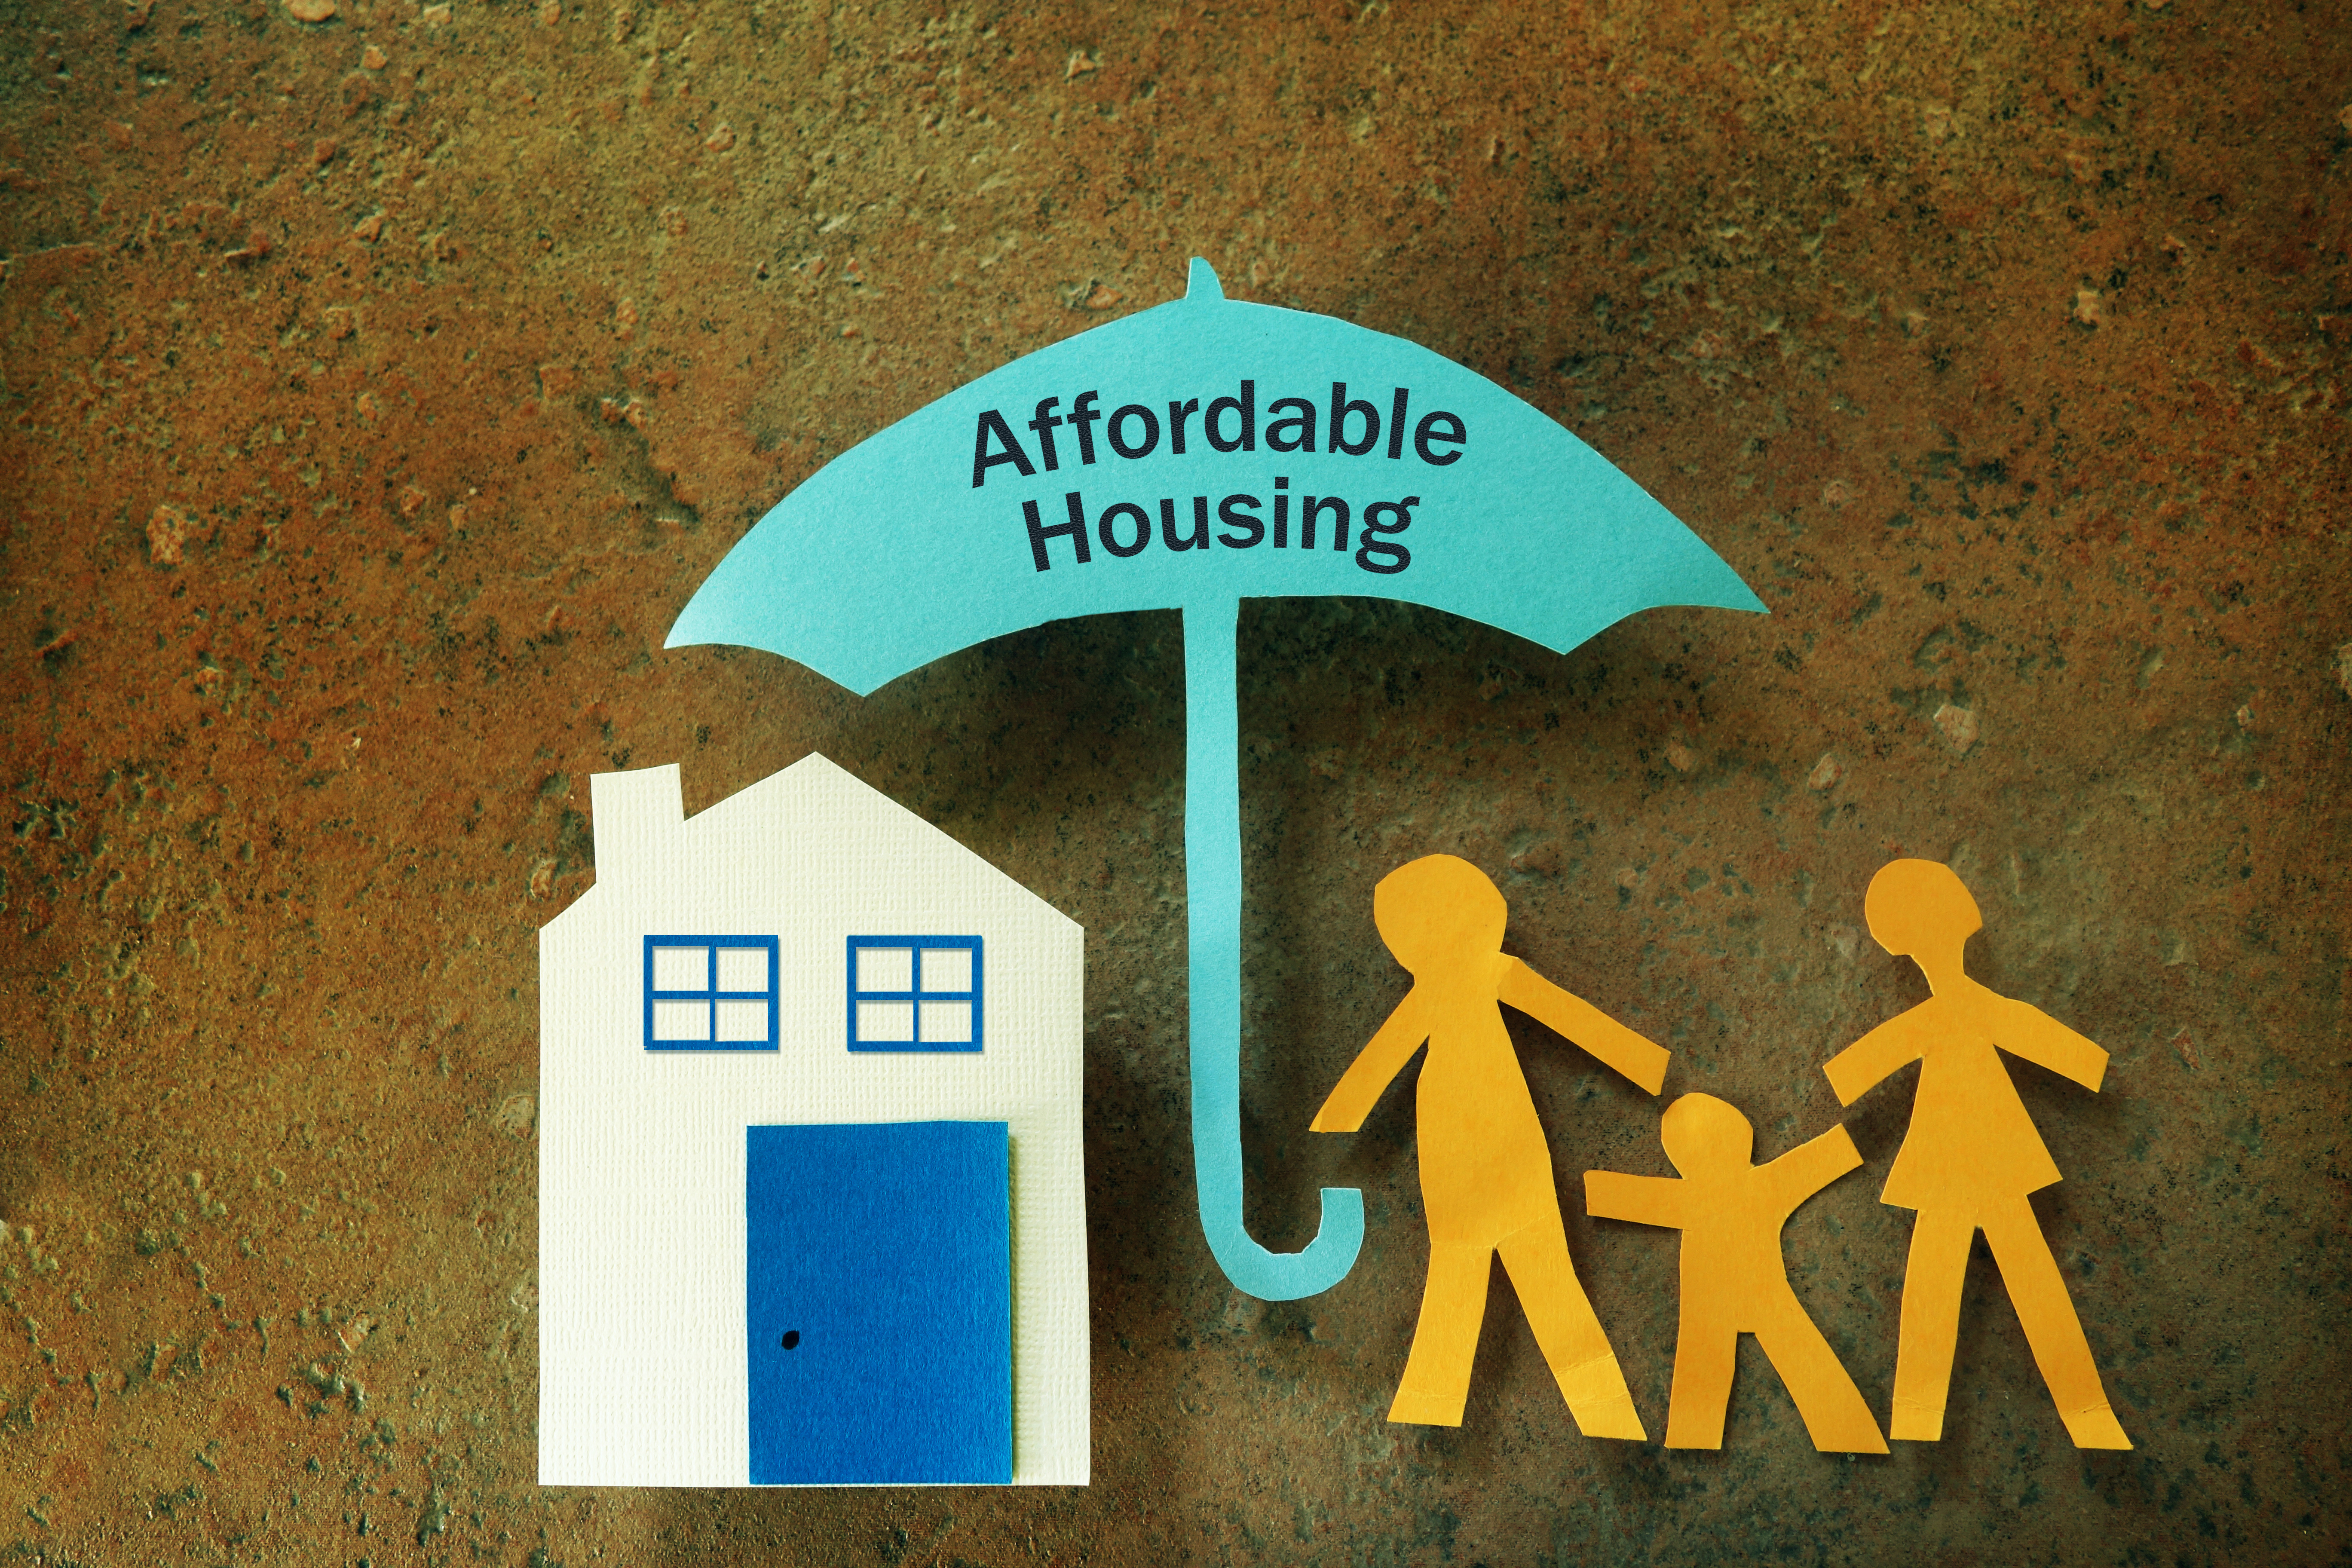 affordable housing, hb 1406, affordable housing tax credit